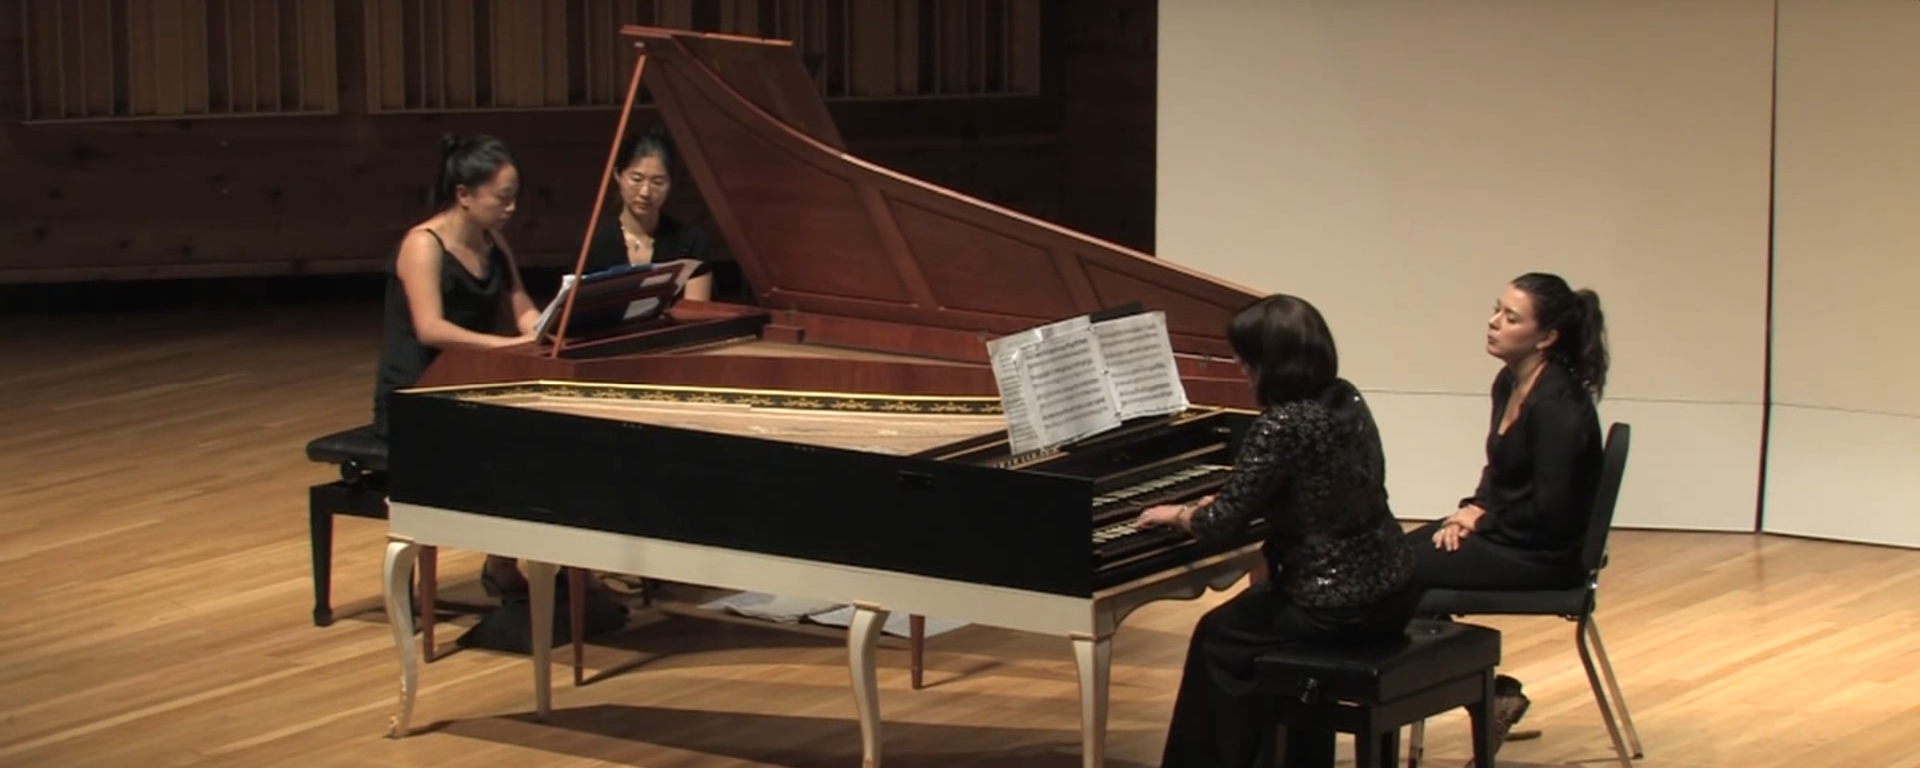 In the Salons of Europe: Fortepiano-Harpsichord Duos in the Eighteenth Century